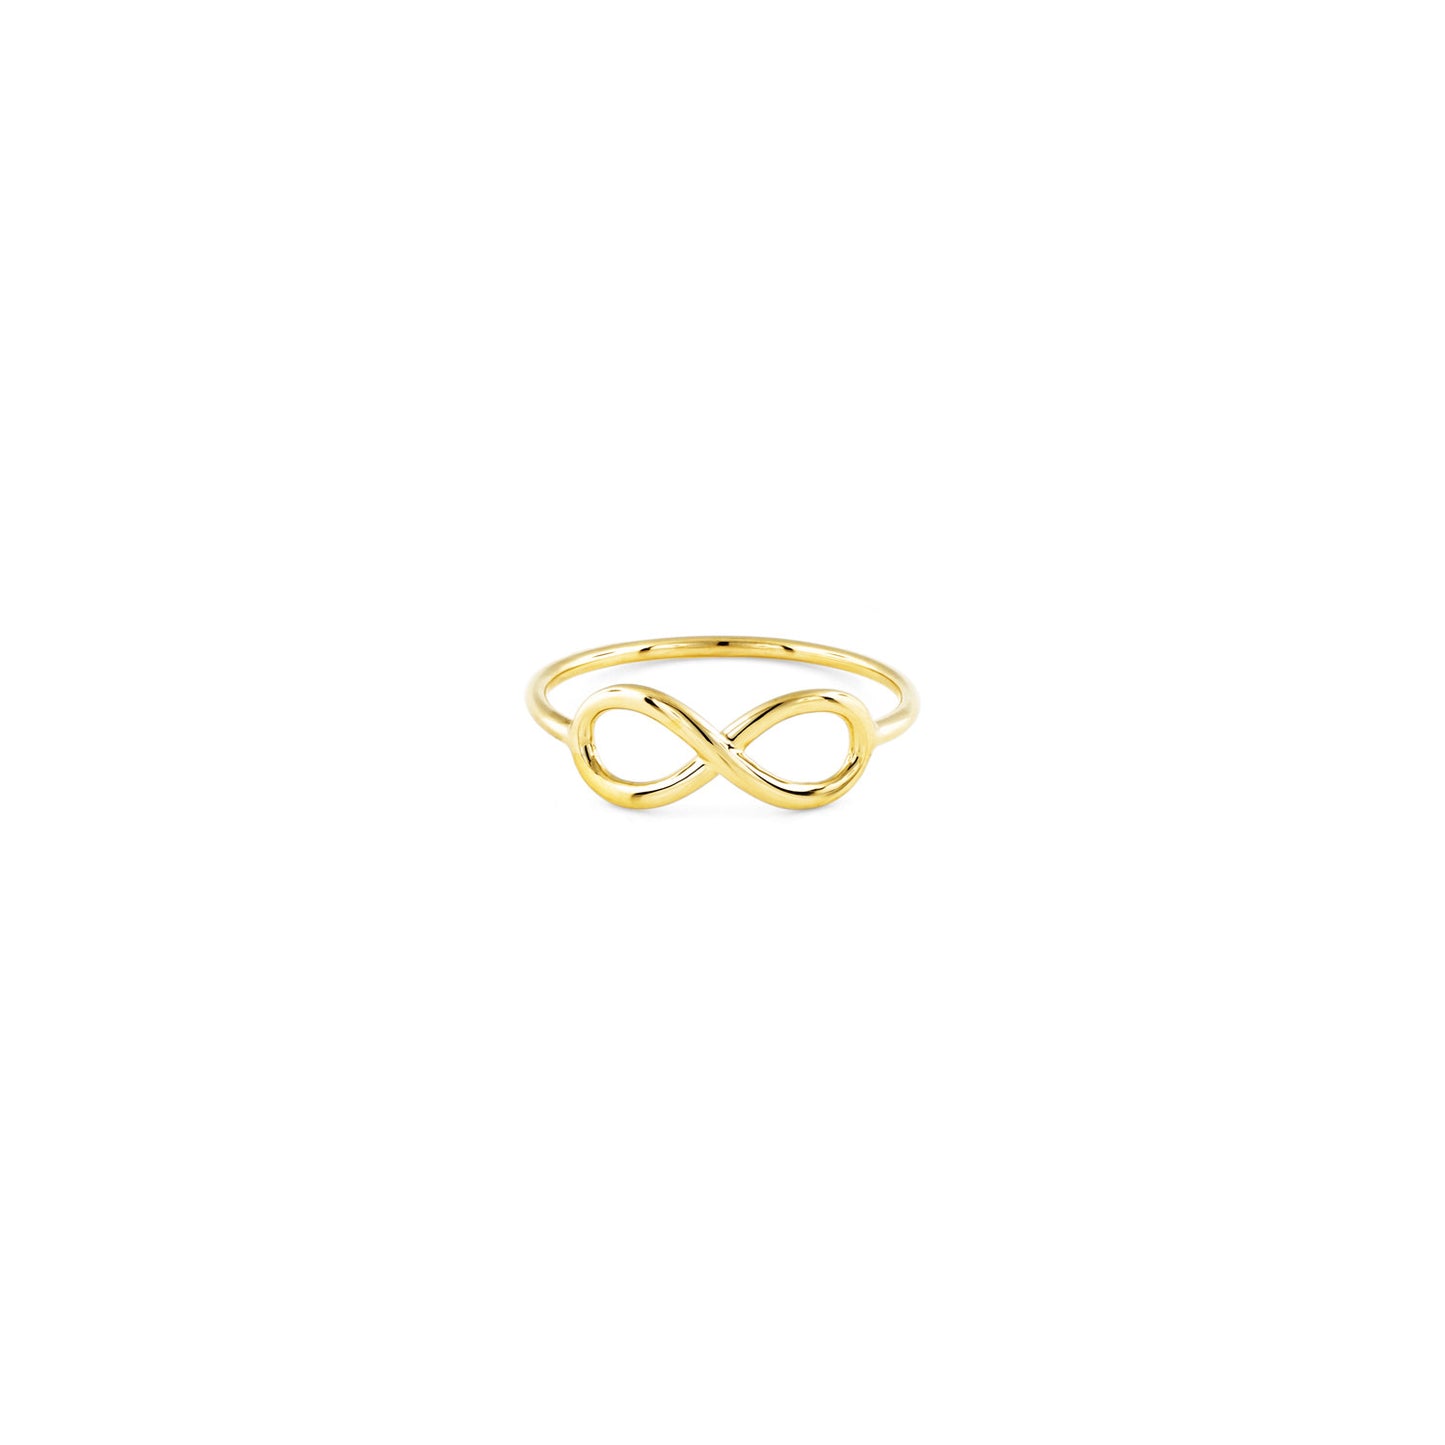 large infinity sign ring in yellow gold PRR 065 14KY